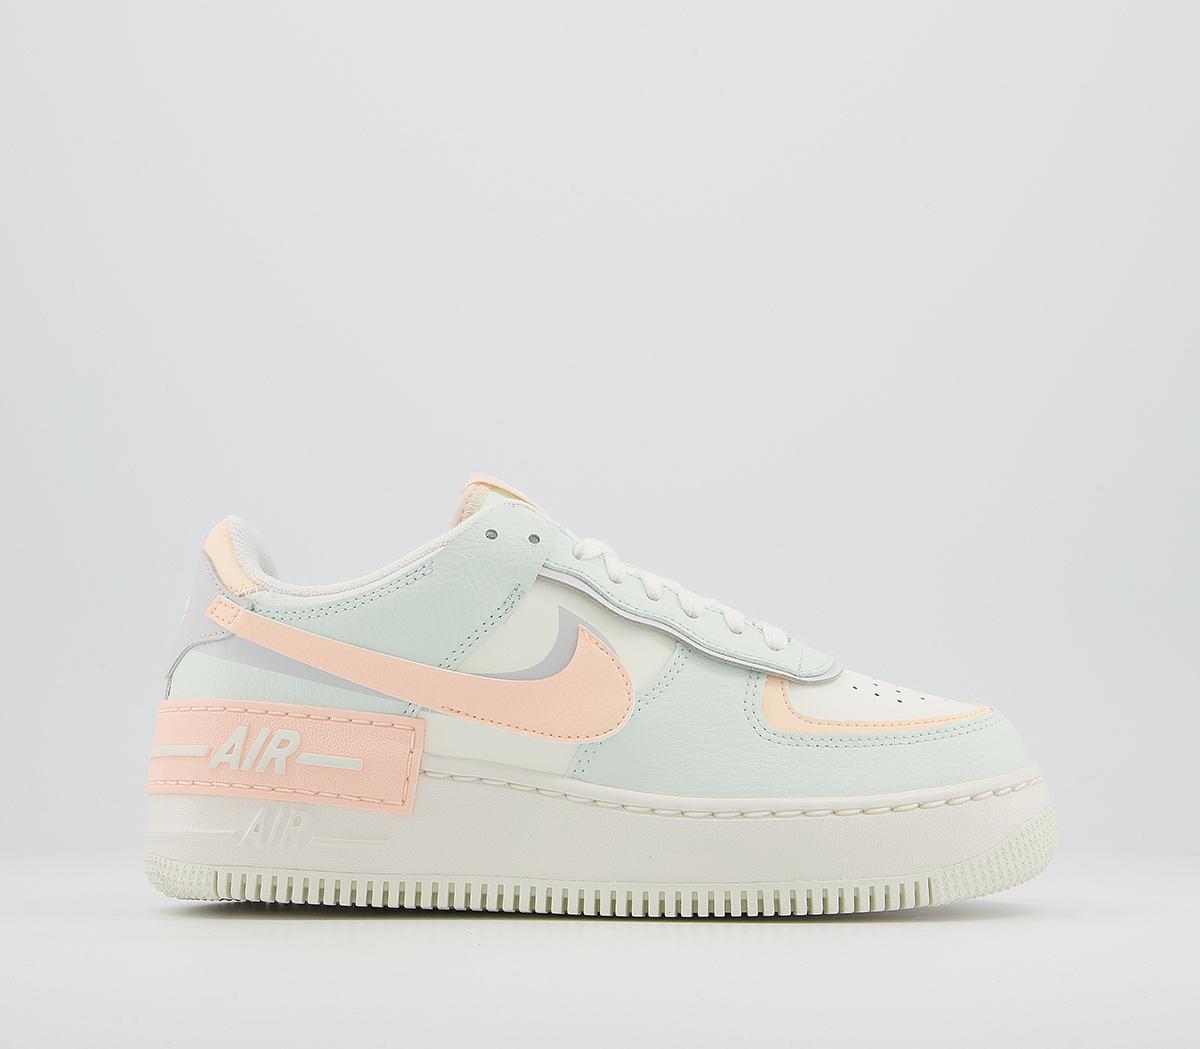 NikeAir Force 1 Shadow TrainersSail Barely Green Crimson Tint